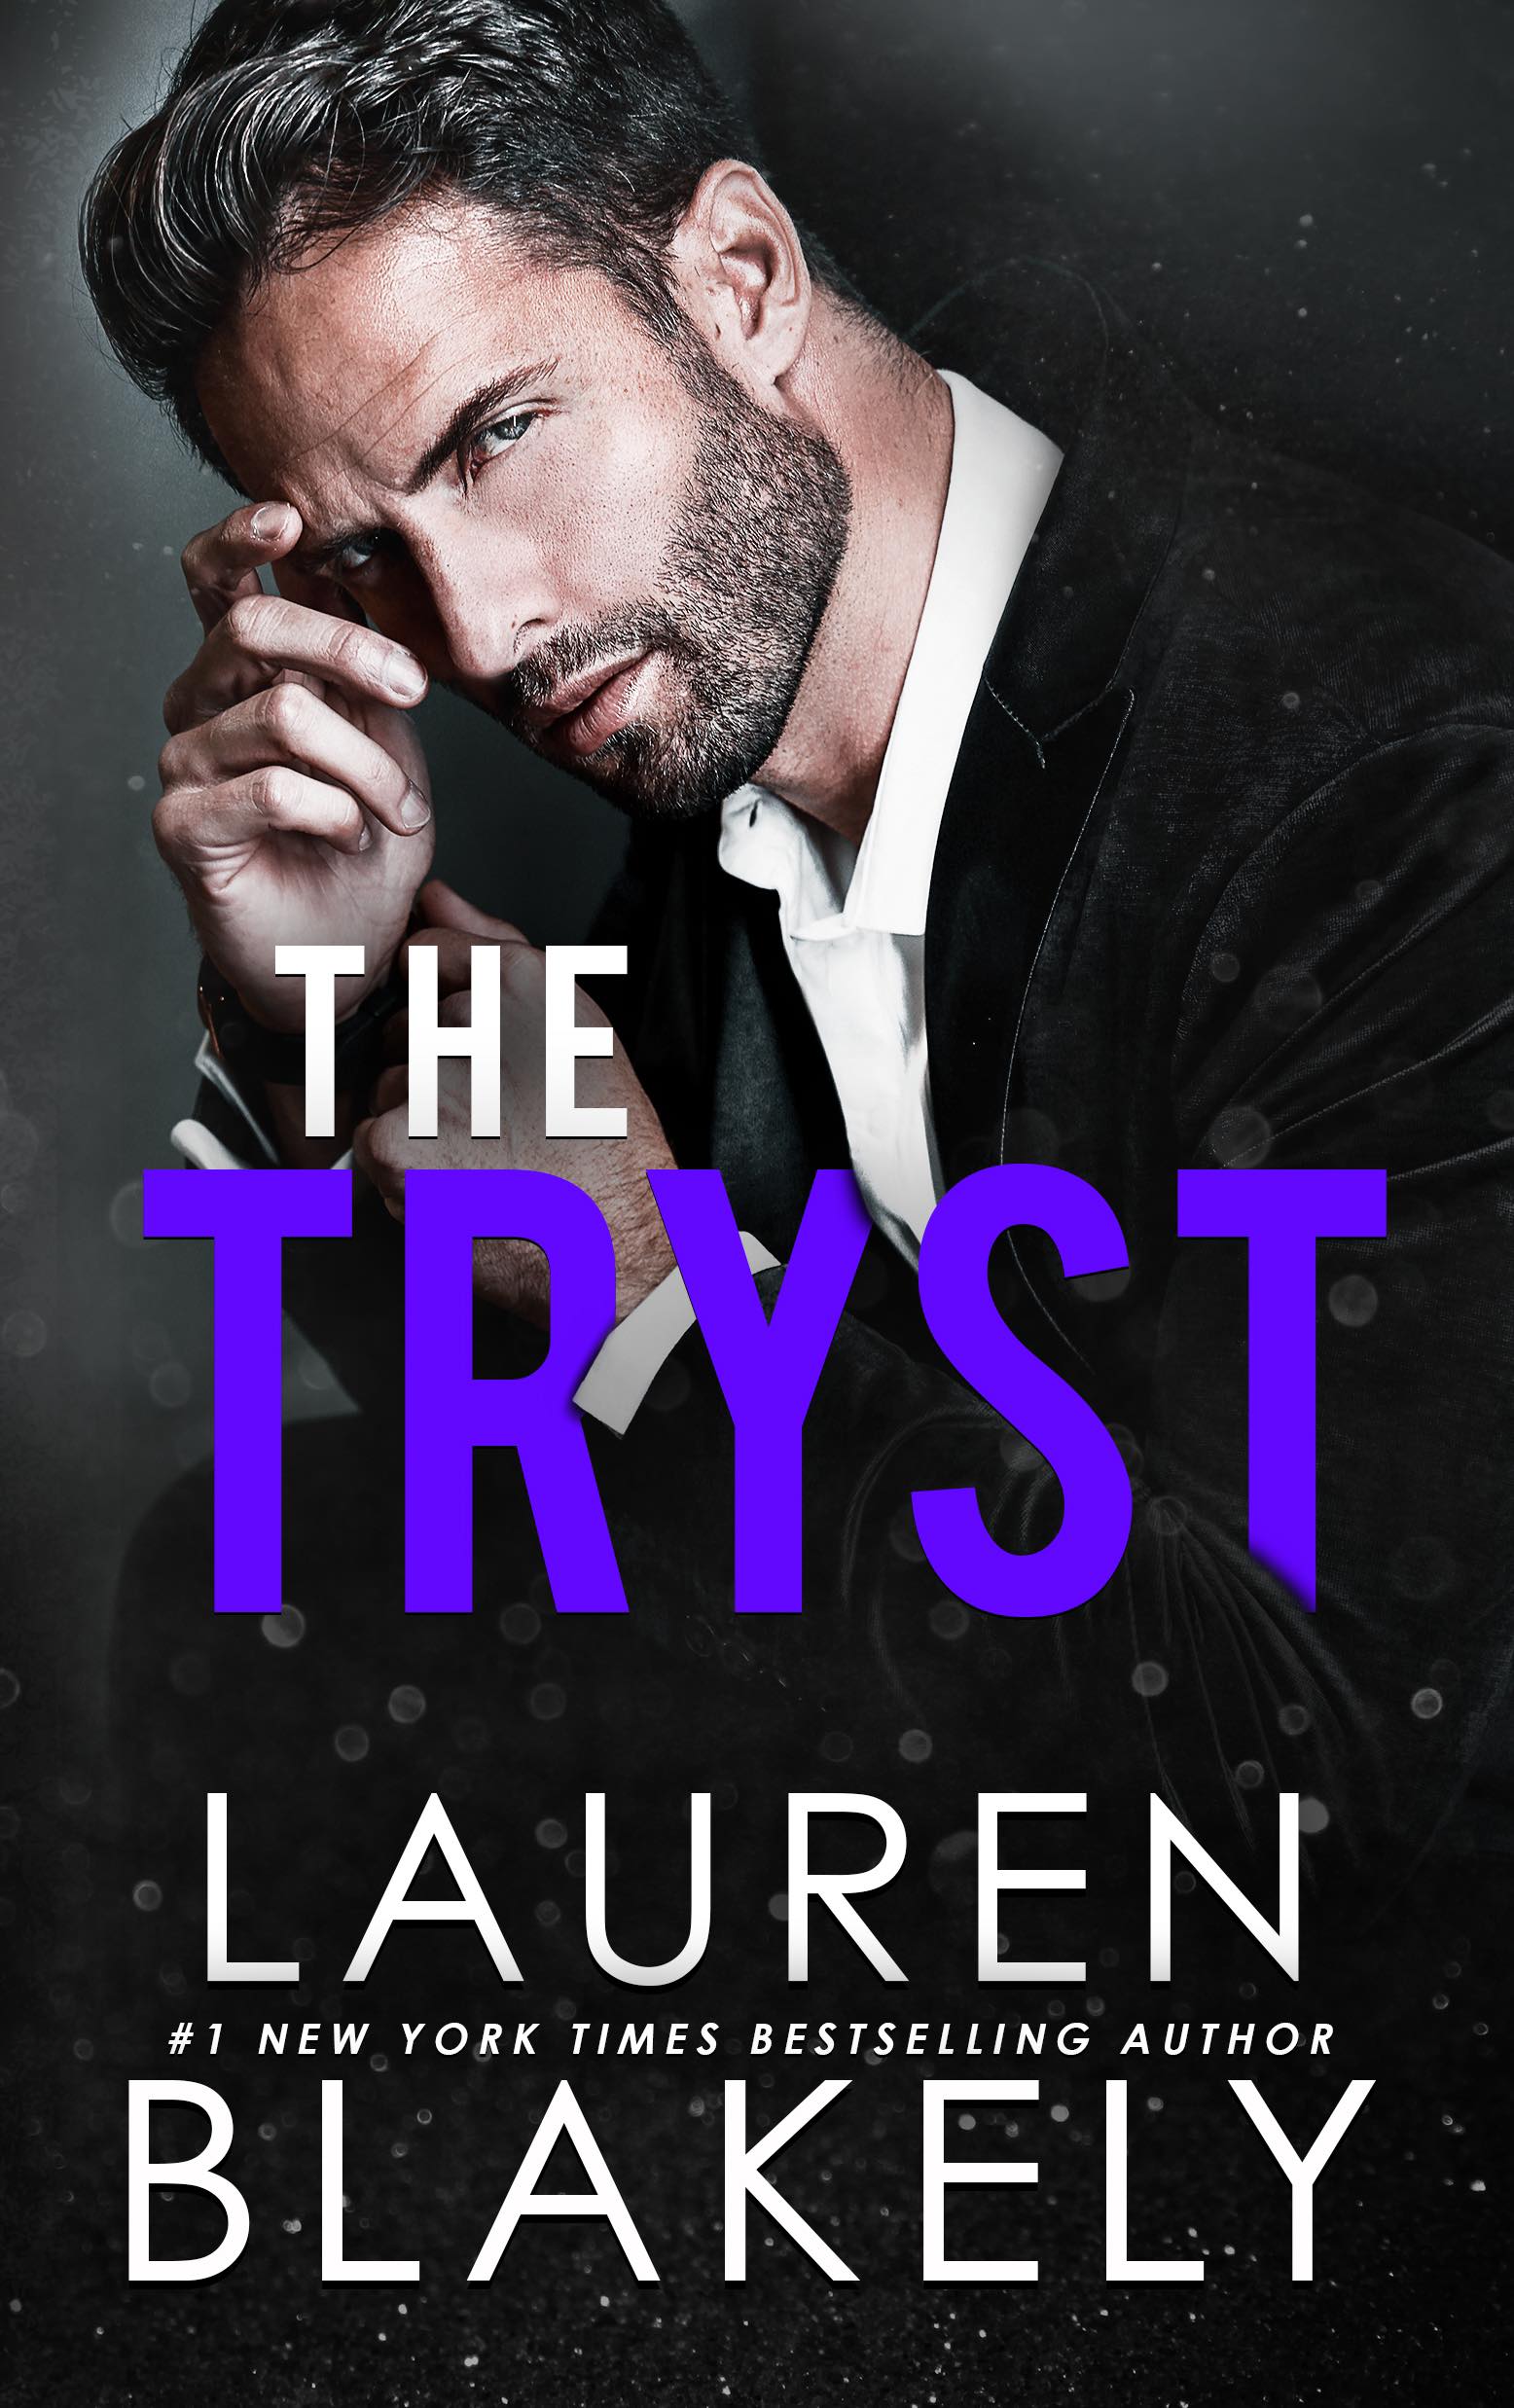 The Tryst by Lauren Blakely PDF Download Video Library